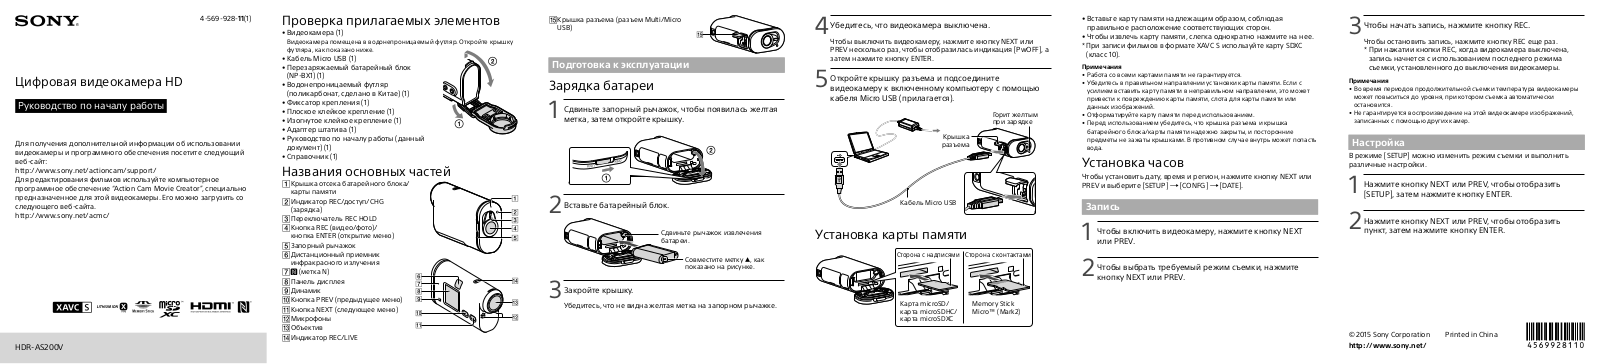 Sony HDR-AS200VR User Manual